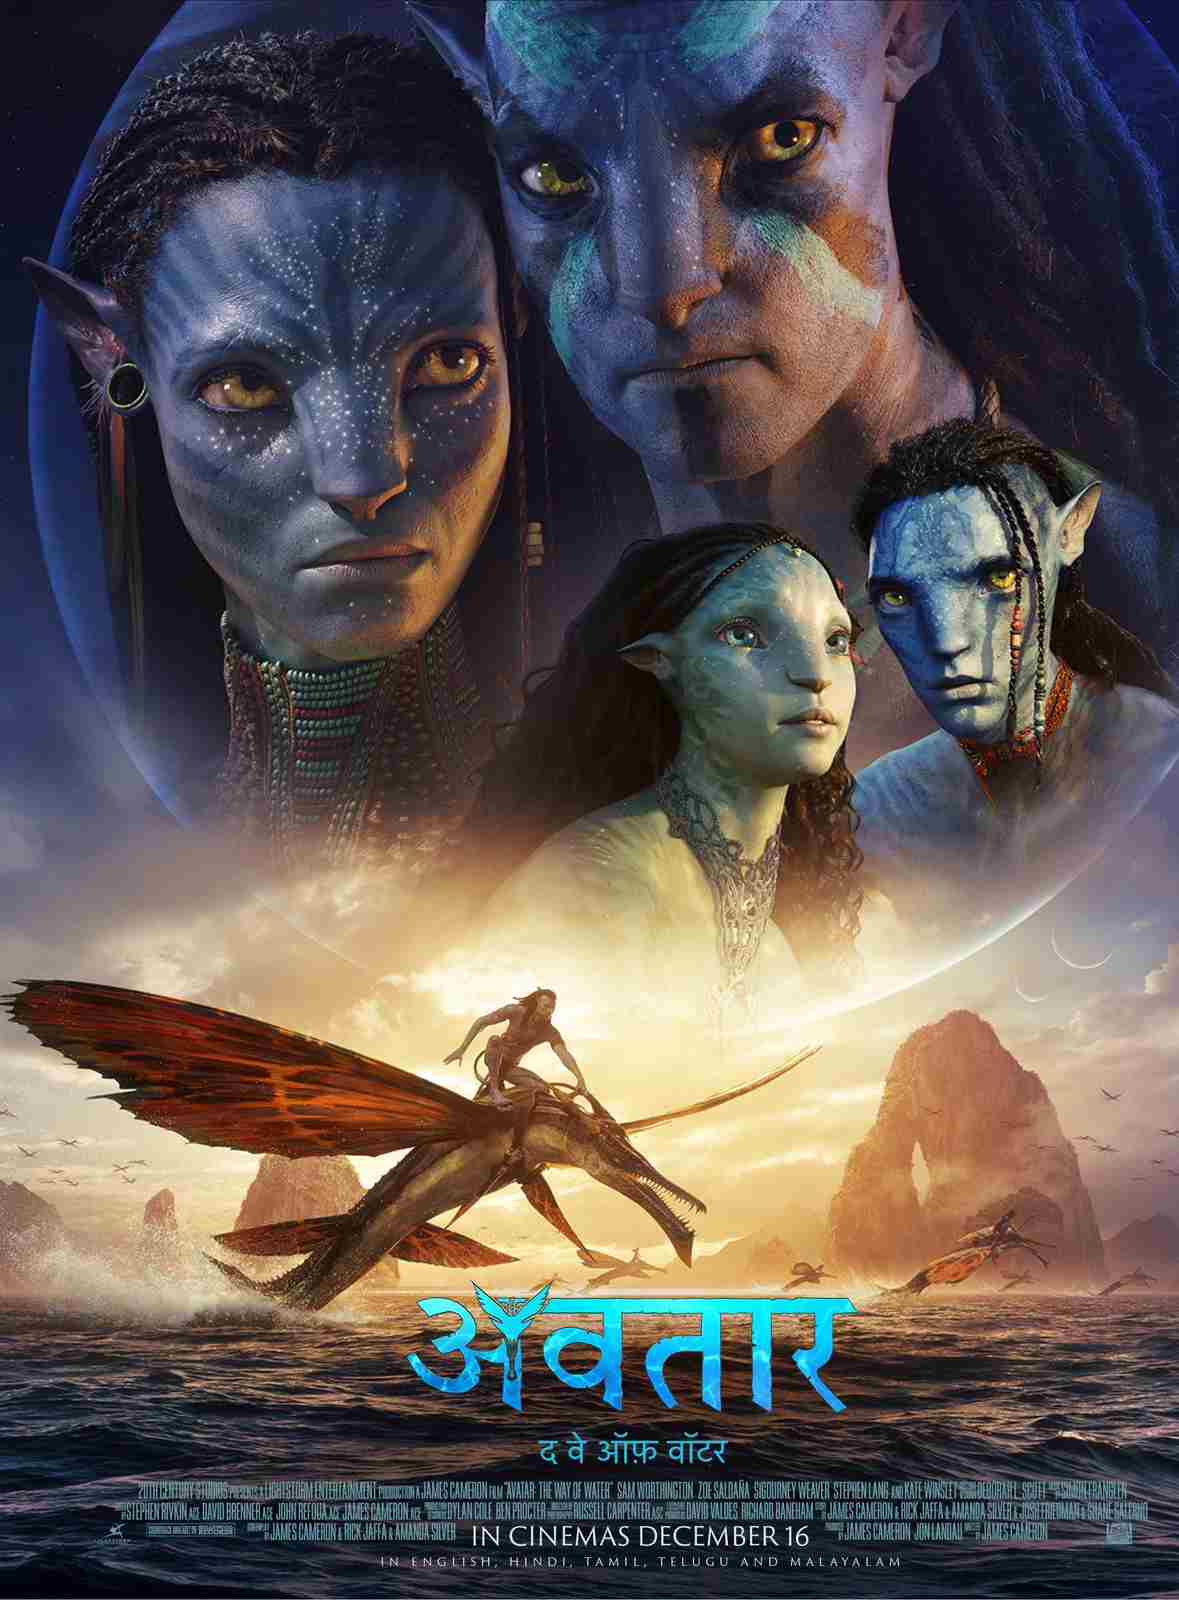 Avatar: The Way of Water | Official Hindi Trailer